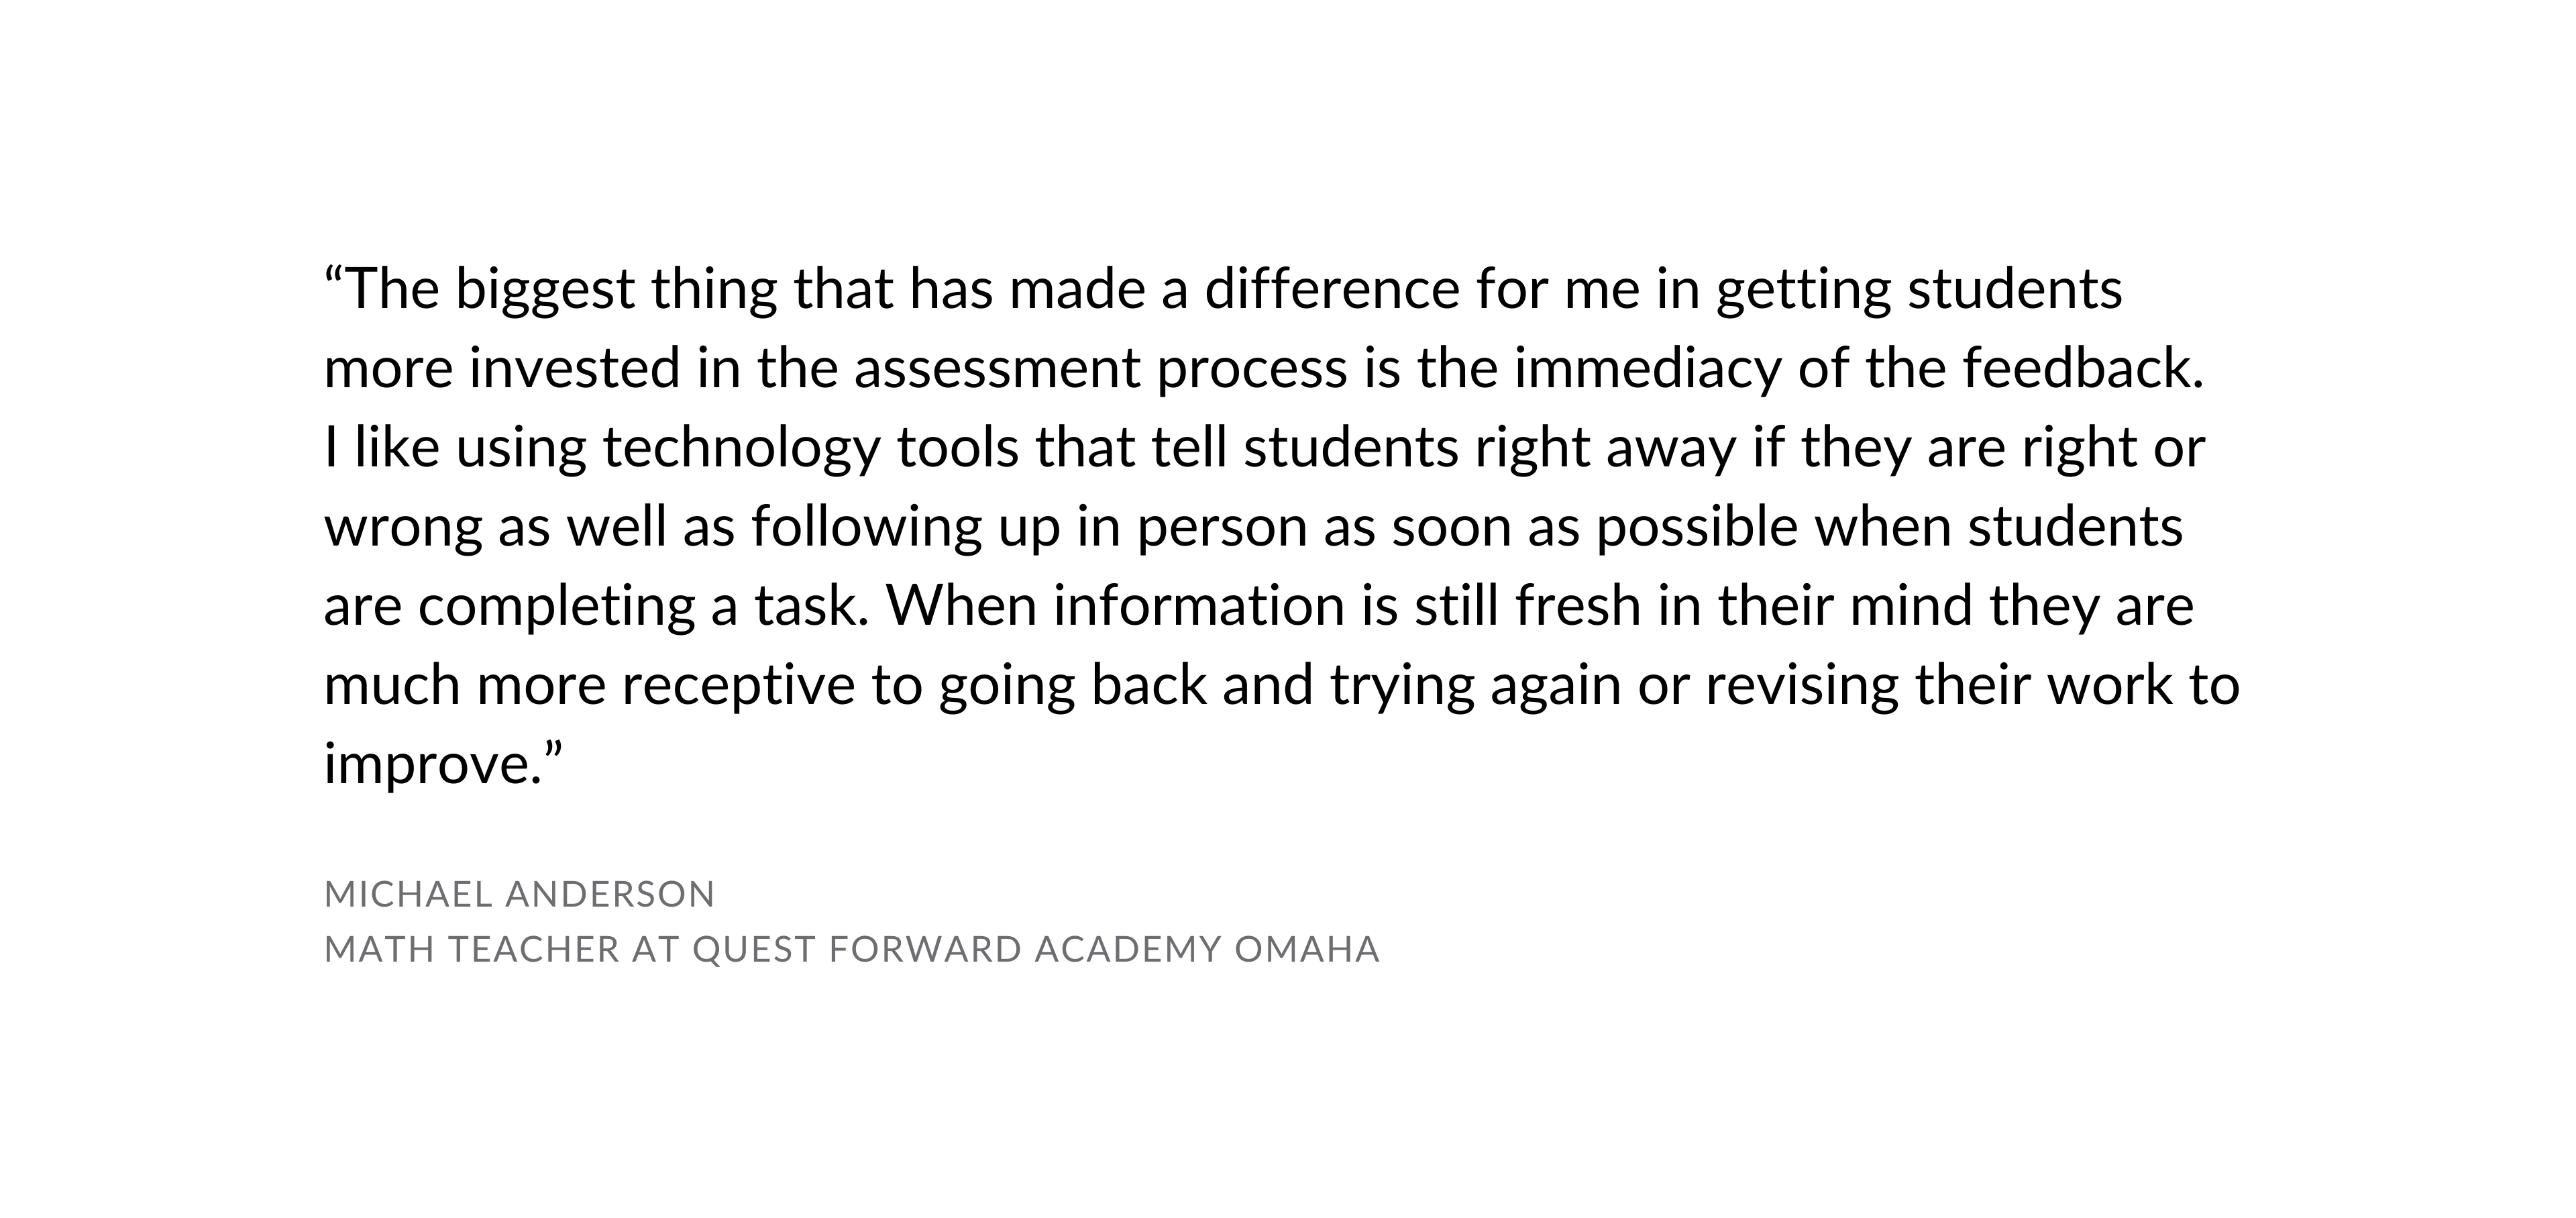 "The biggest thing that has made a difference for me in getting students more invested in the assessment process is the immediacy of the feedback. I like using technology tools that tell students right away if they are right or wrong as well as following up in person as soon as possible when students are completing a task. When information is still fresh in their mind they are much more receptive to going back and trying again or revising their work to improve." Michael Anderson Math Teacher at Quest Forward Academy Omaha